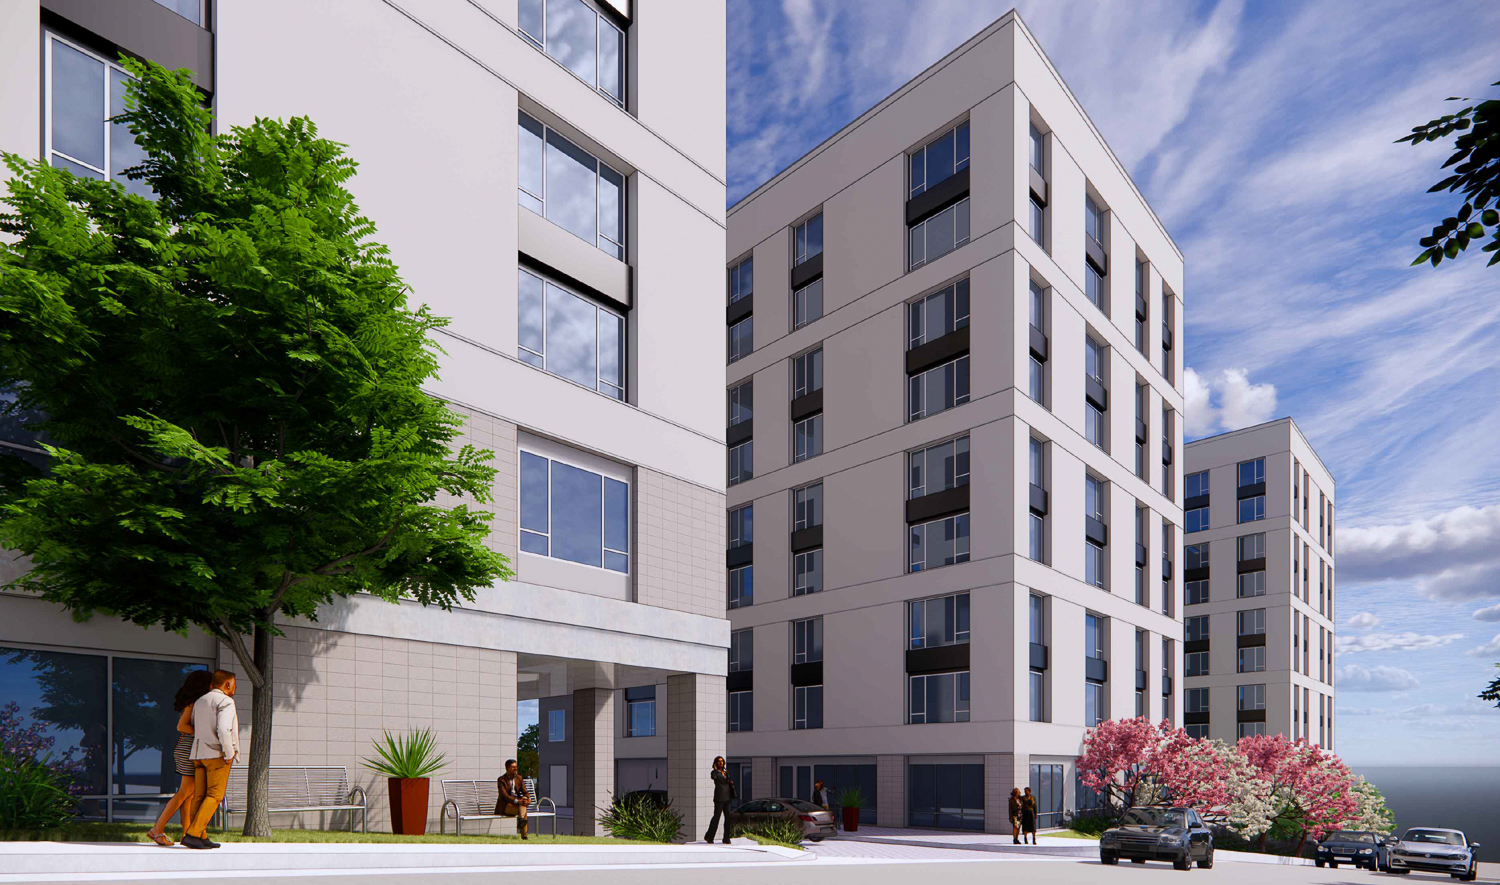 840 San Bruno Avenue project entry, rendering by KTGY